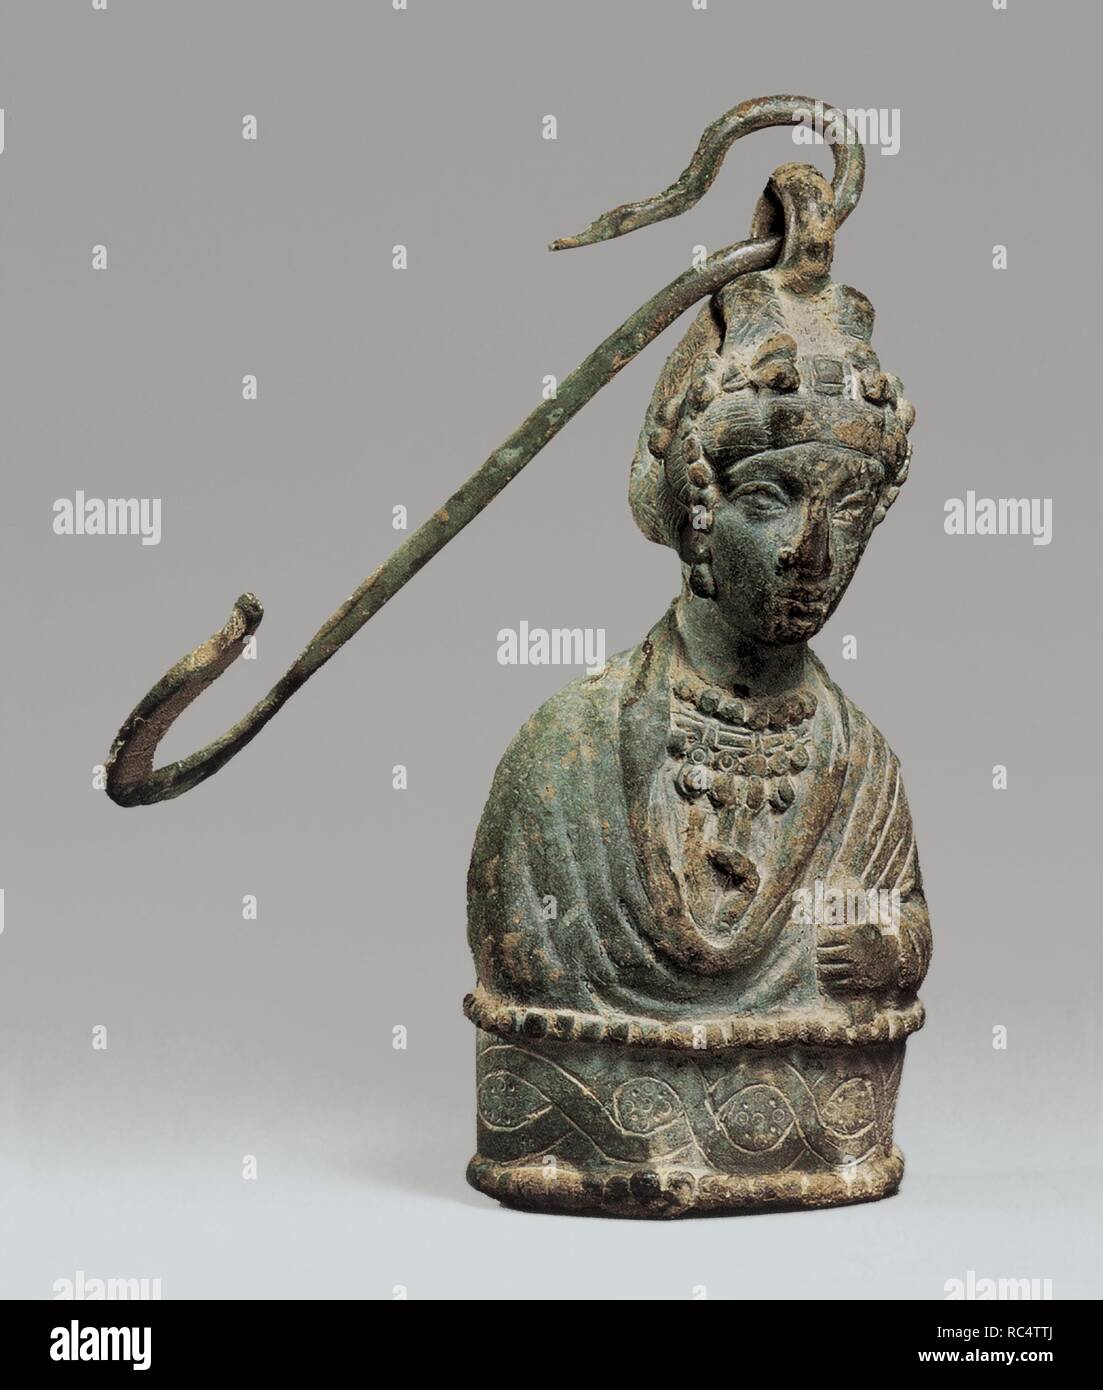 Steelyard Weight with a Bust of a Byzantine Empress and a Hook. Culture: Byzantine. Dimensions: 9 1/2 × 4 1/2 × 2 13/16 in., 12.5 lb. (24.2 × 11.5 × 7.1 cm, 5664g)  Other (Hook): 8 7/8 × 3 × 1 1/4 × 1/4 in., 0.4 lb. (22.6 × 7.6 × 3.2 × 0.7 cm, 176g). Date: 400-450.  Steelyard weights often took the shape of busts of Byzantine empresses. This unusually detailed image may depict an empress of the Theodosian dynasty, which ruled from 379 to 450. The weight--itself about five pounds, or seven Byzantine litrae--would have been used for heavier goods. Museum: Metropolitan Museum of Art, New York, US Stock Photo